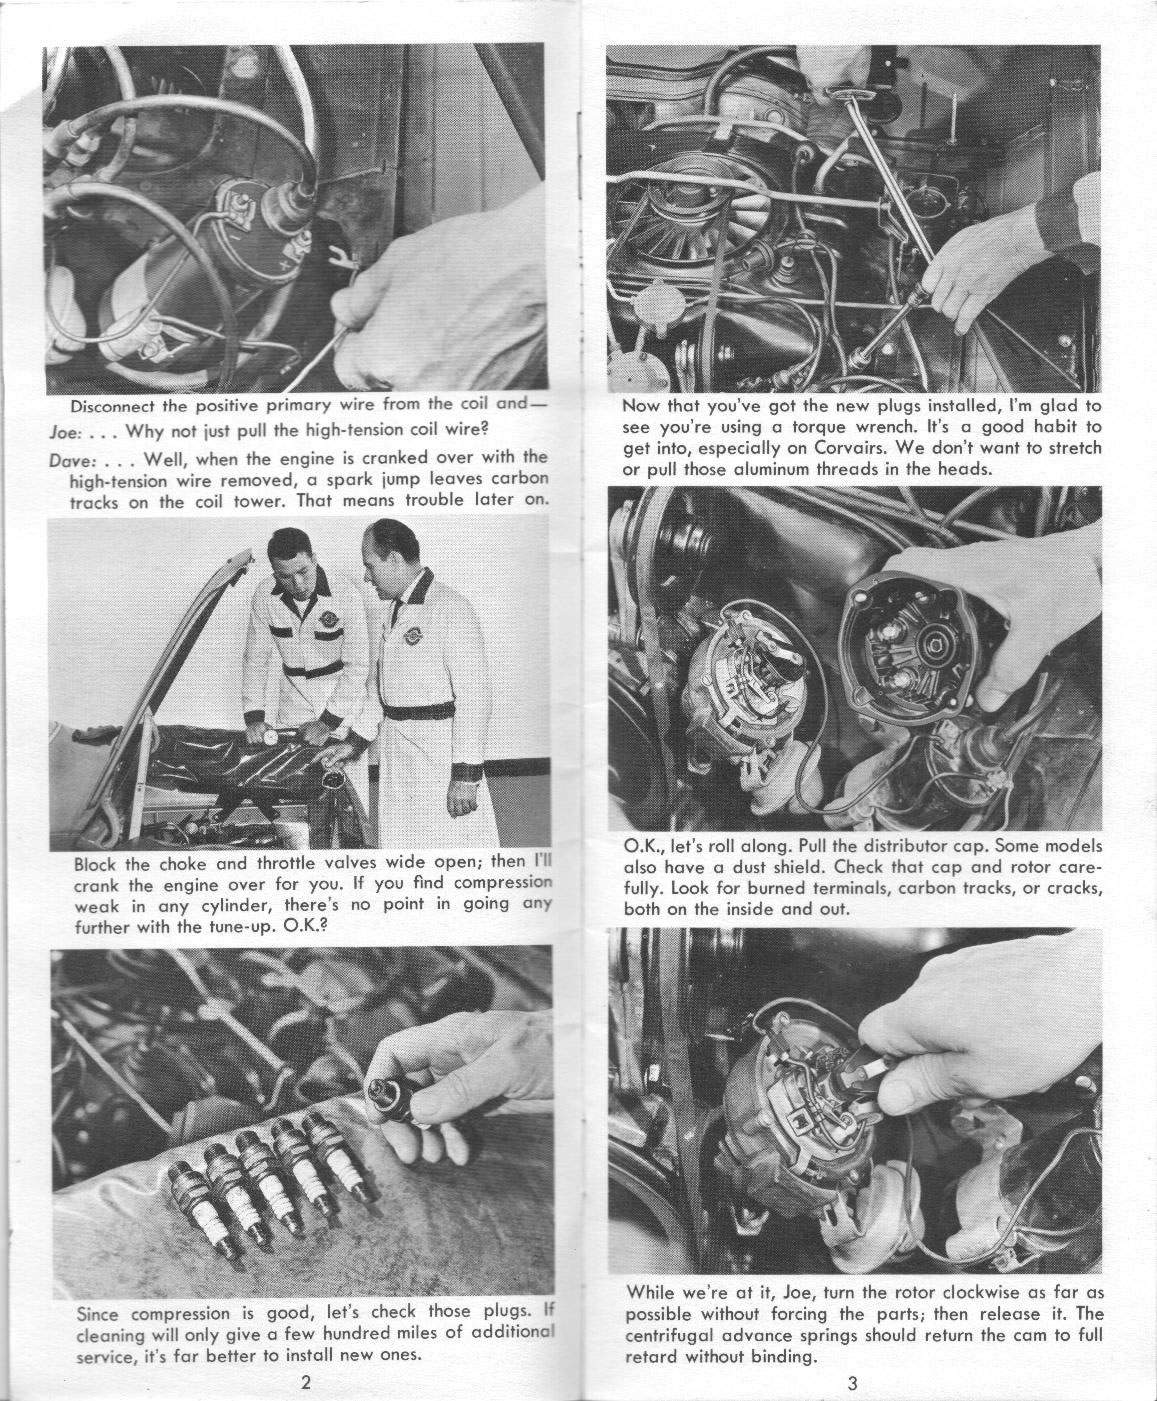 1964_Corvair_Tune-up-03